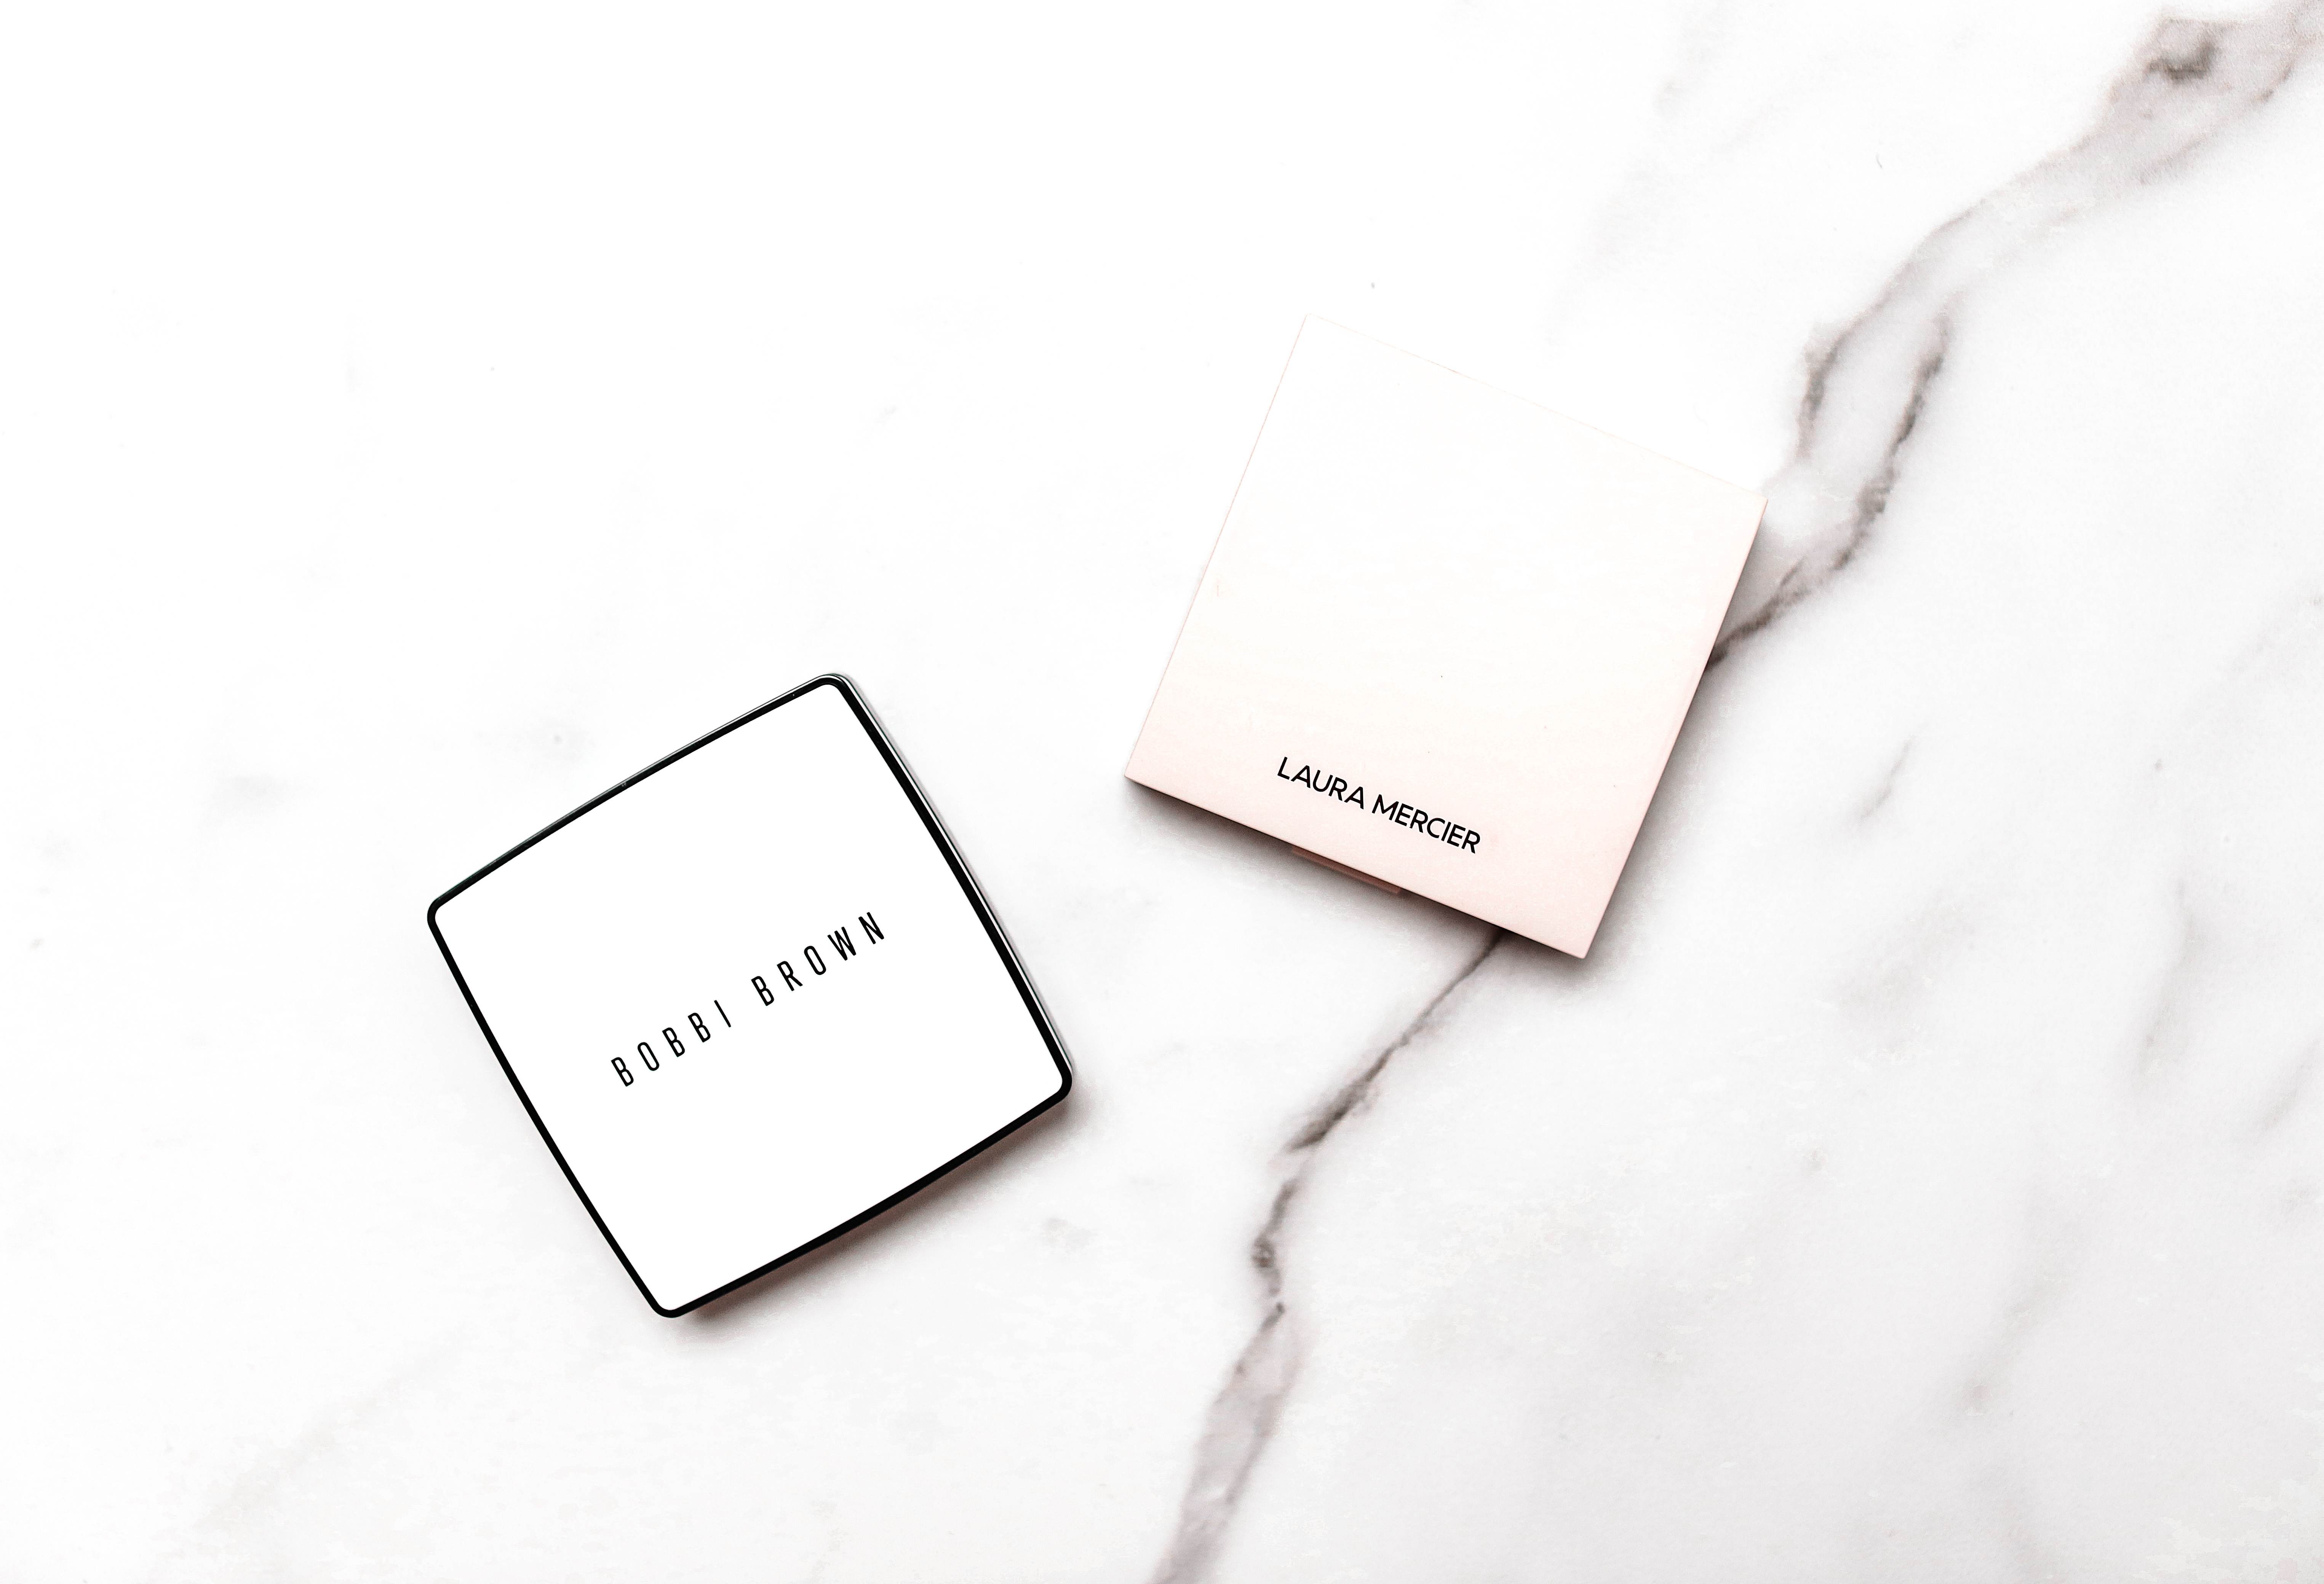 Bobbi Brown Vitamin Enriched Pressed Powder Yellow Laura Mercier Real Flawless Pefecting Poudre